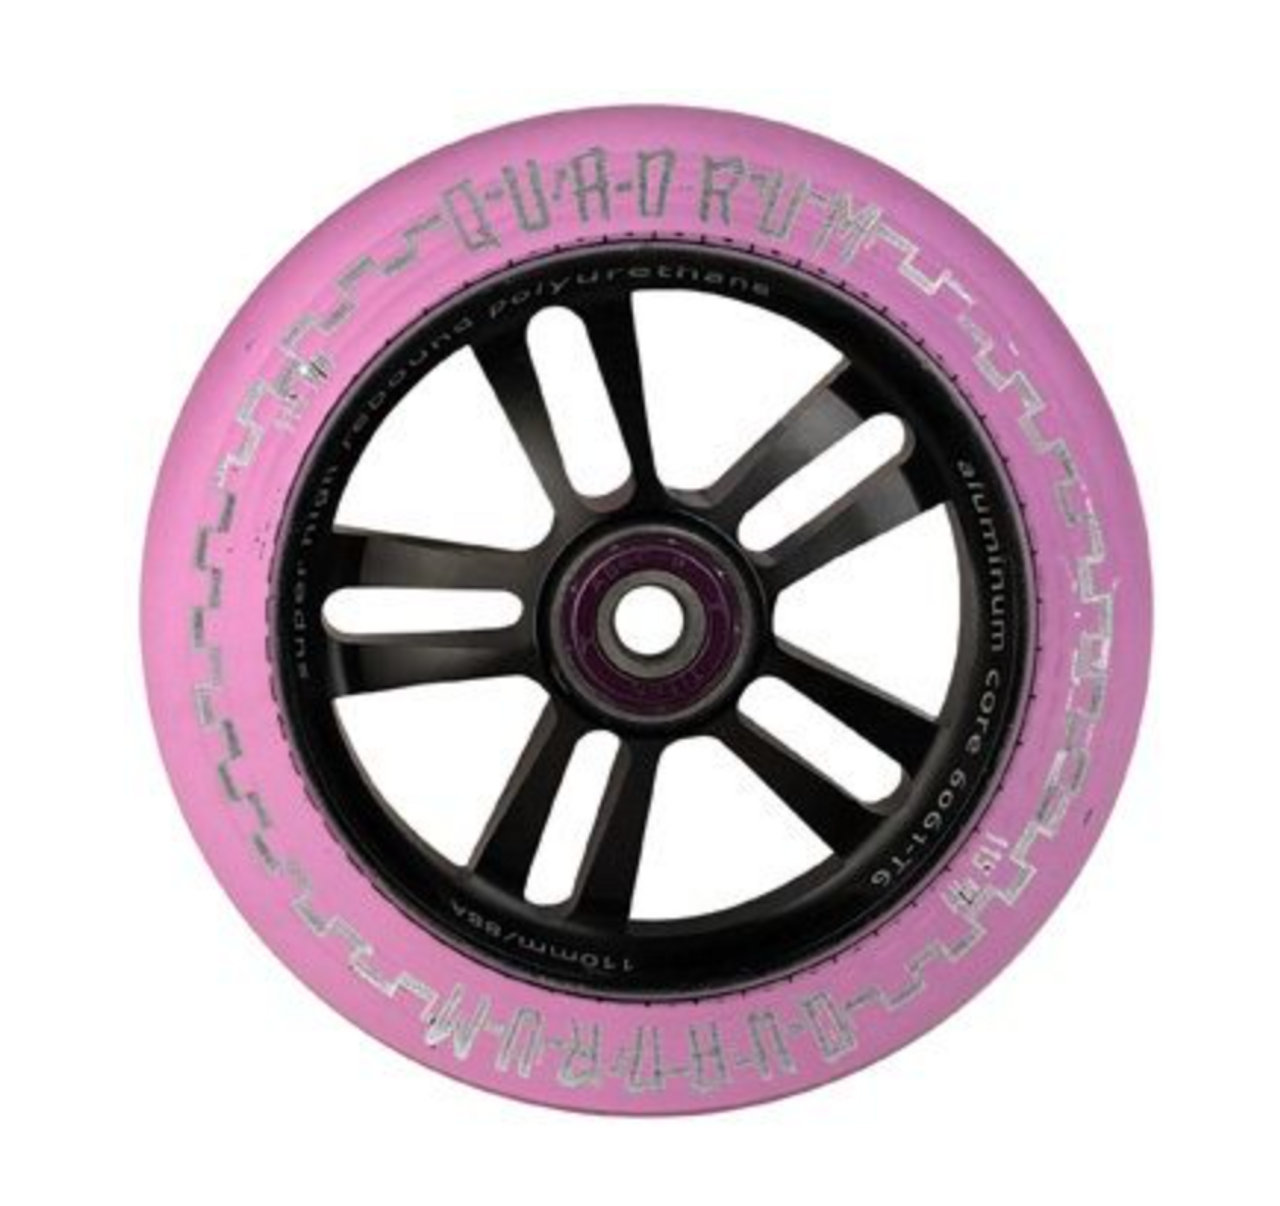 AO Quadrum Pro Scooter Wheels - Pink